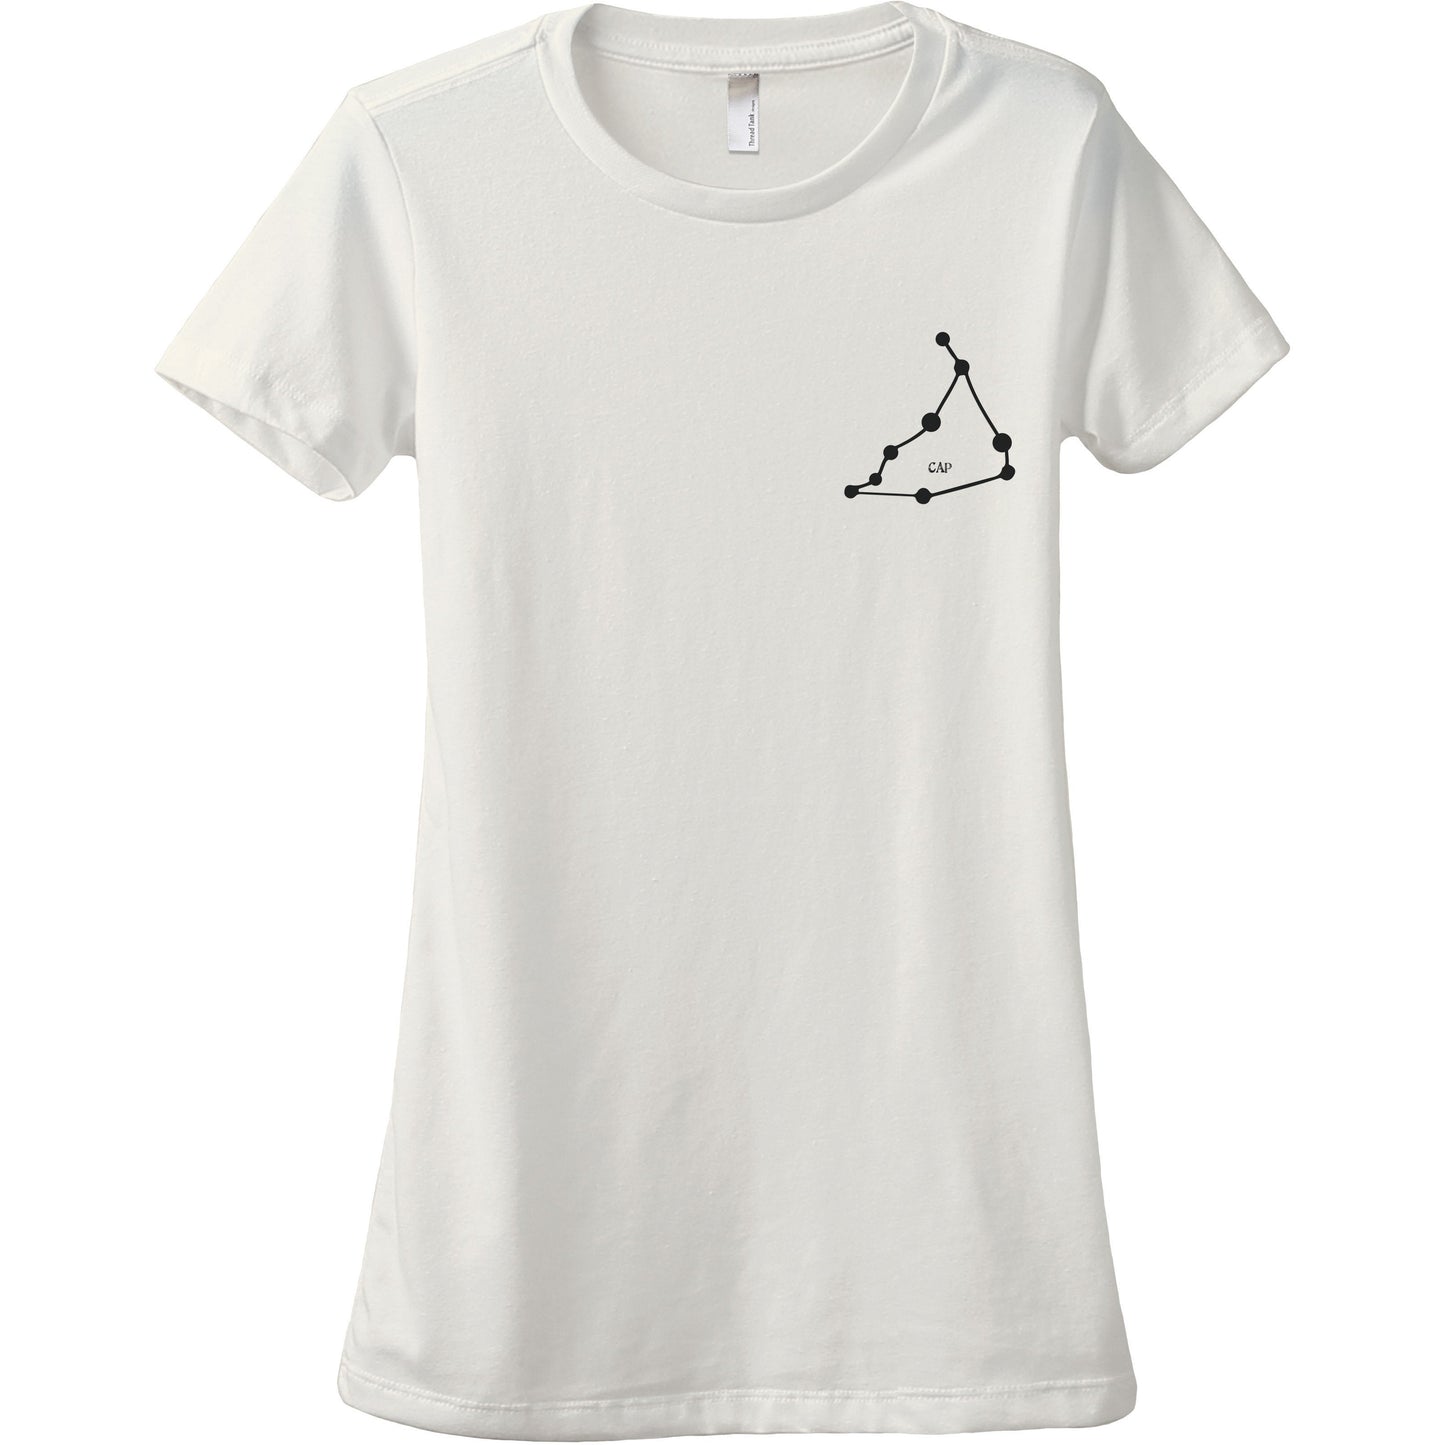 Capricorn CAP Constellation Astrology Women's Relaxed Crewneck T-Shirt Top Tee Vintage White